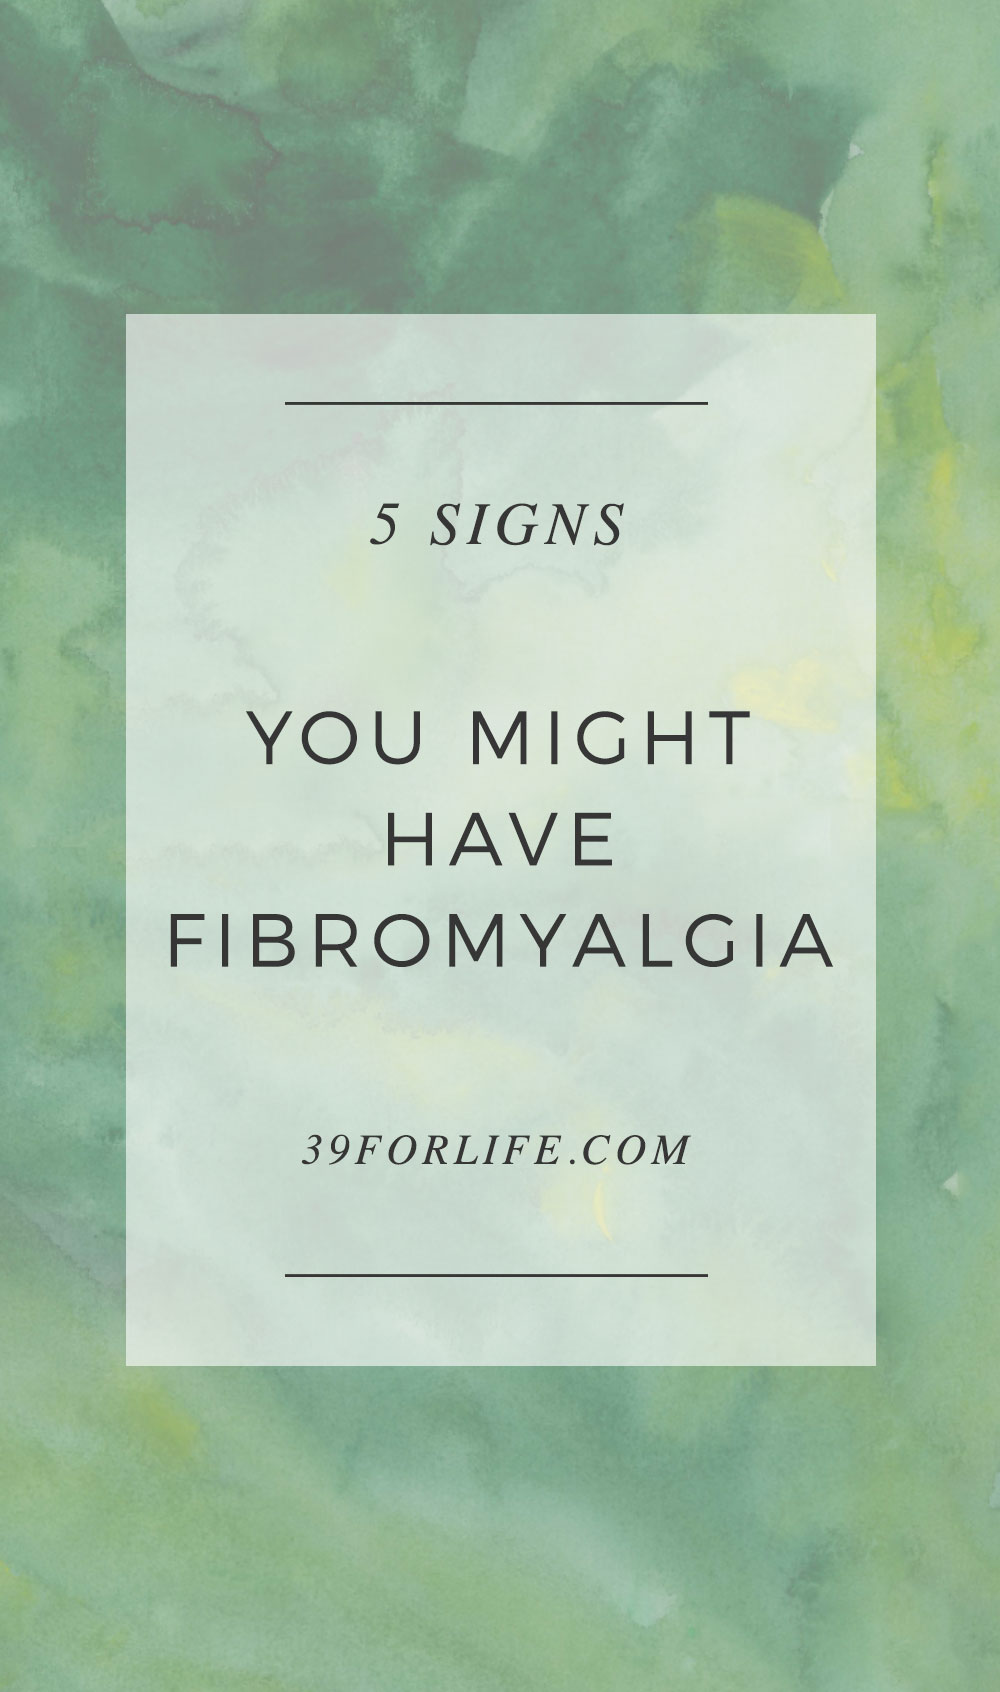 Tiredness and muscle fatigue aren't the only symptoms of fibromyalgia. Here's what to bring up with your doctor if you suspect you might have this autoimmune disorder.